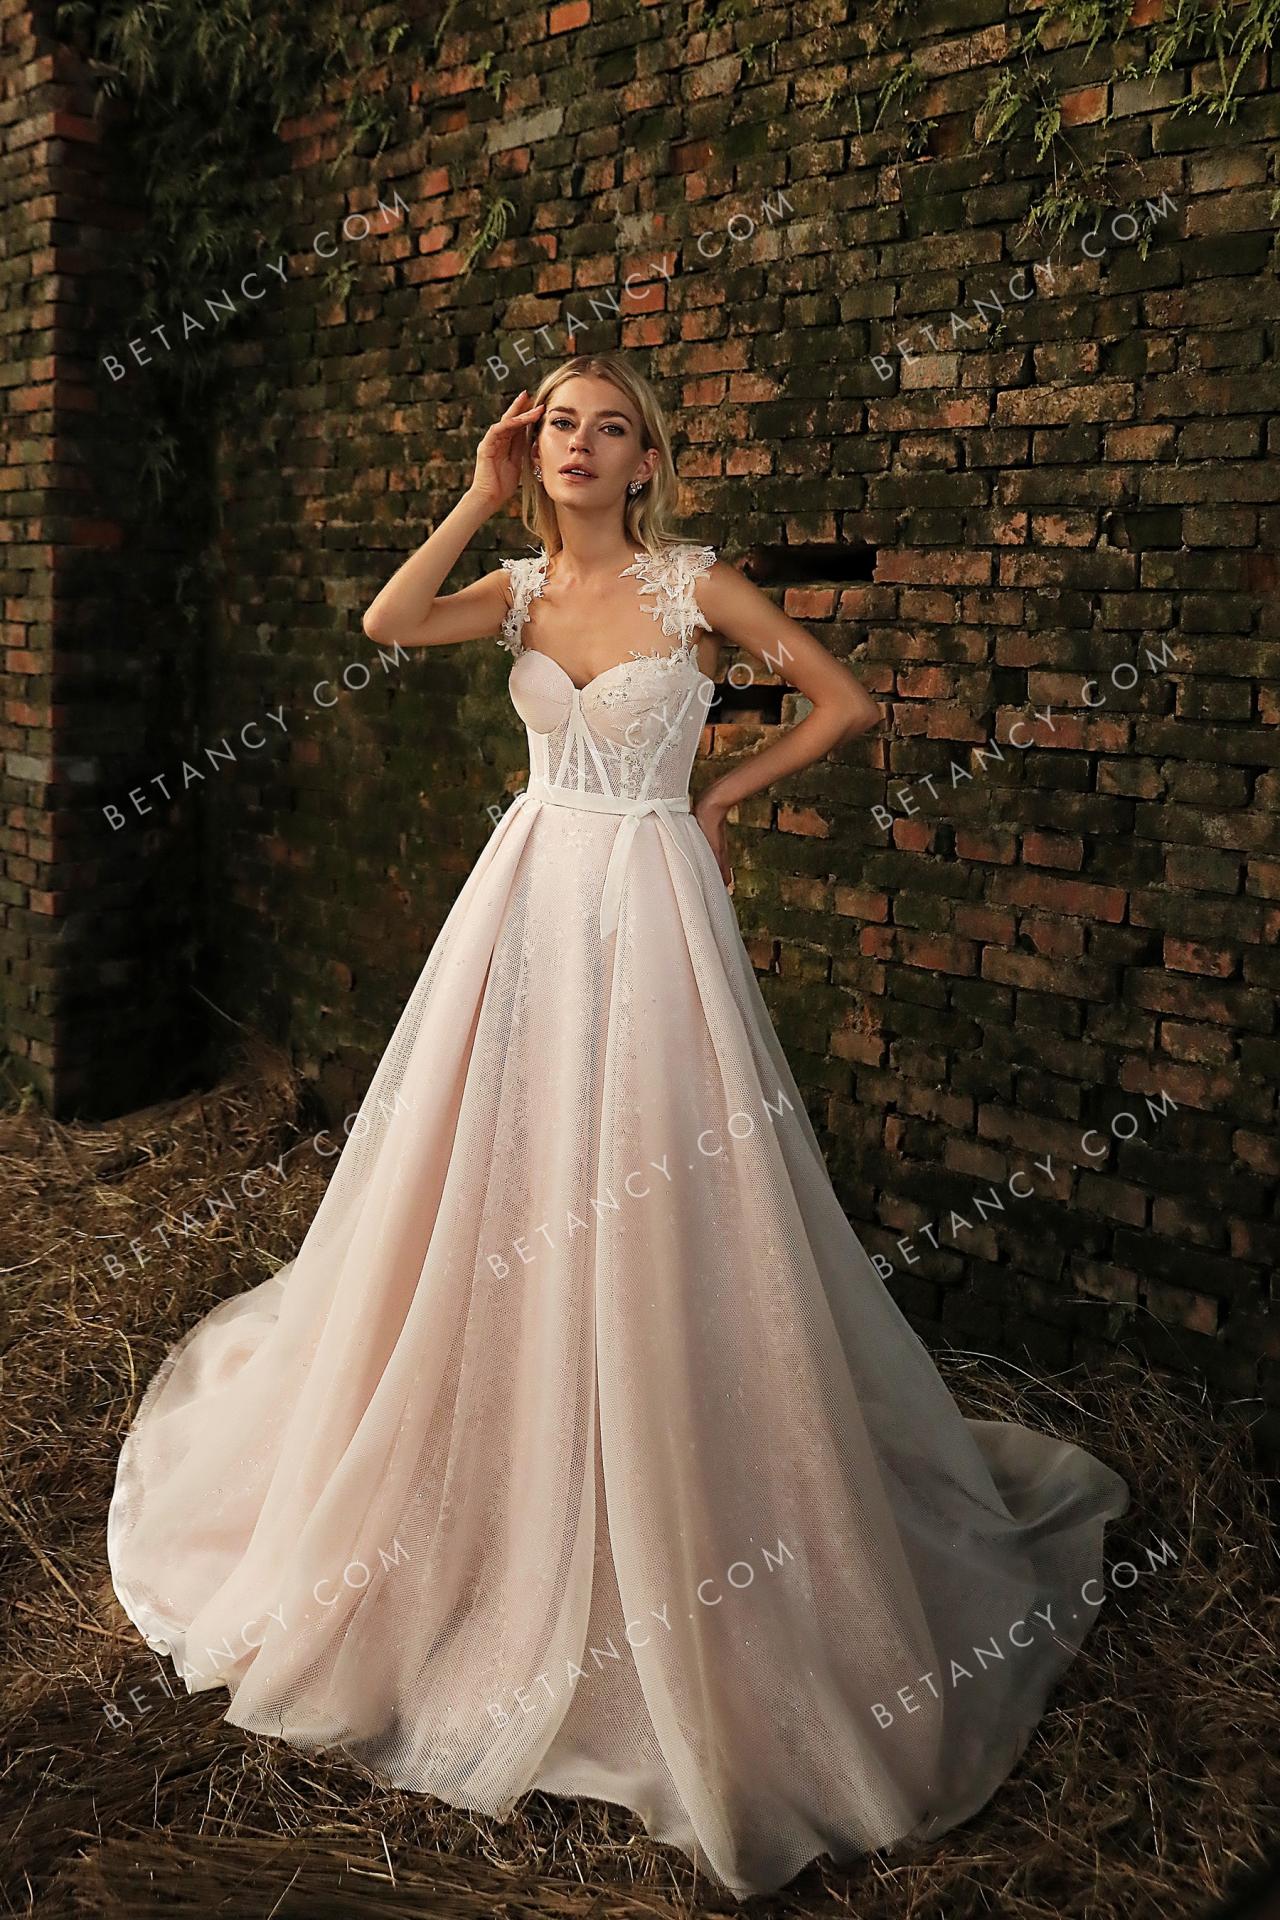 Shimmery leaf pattern lace mixed with dusty rose soft tulle wedding dress 5